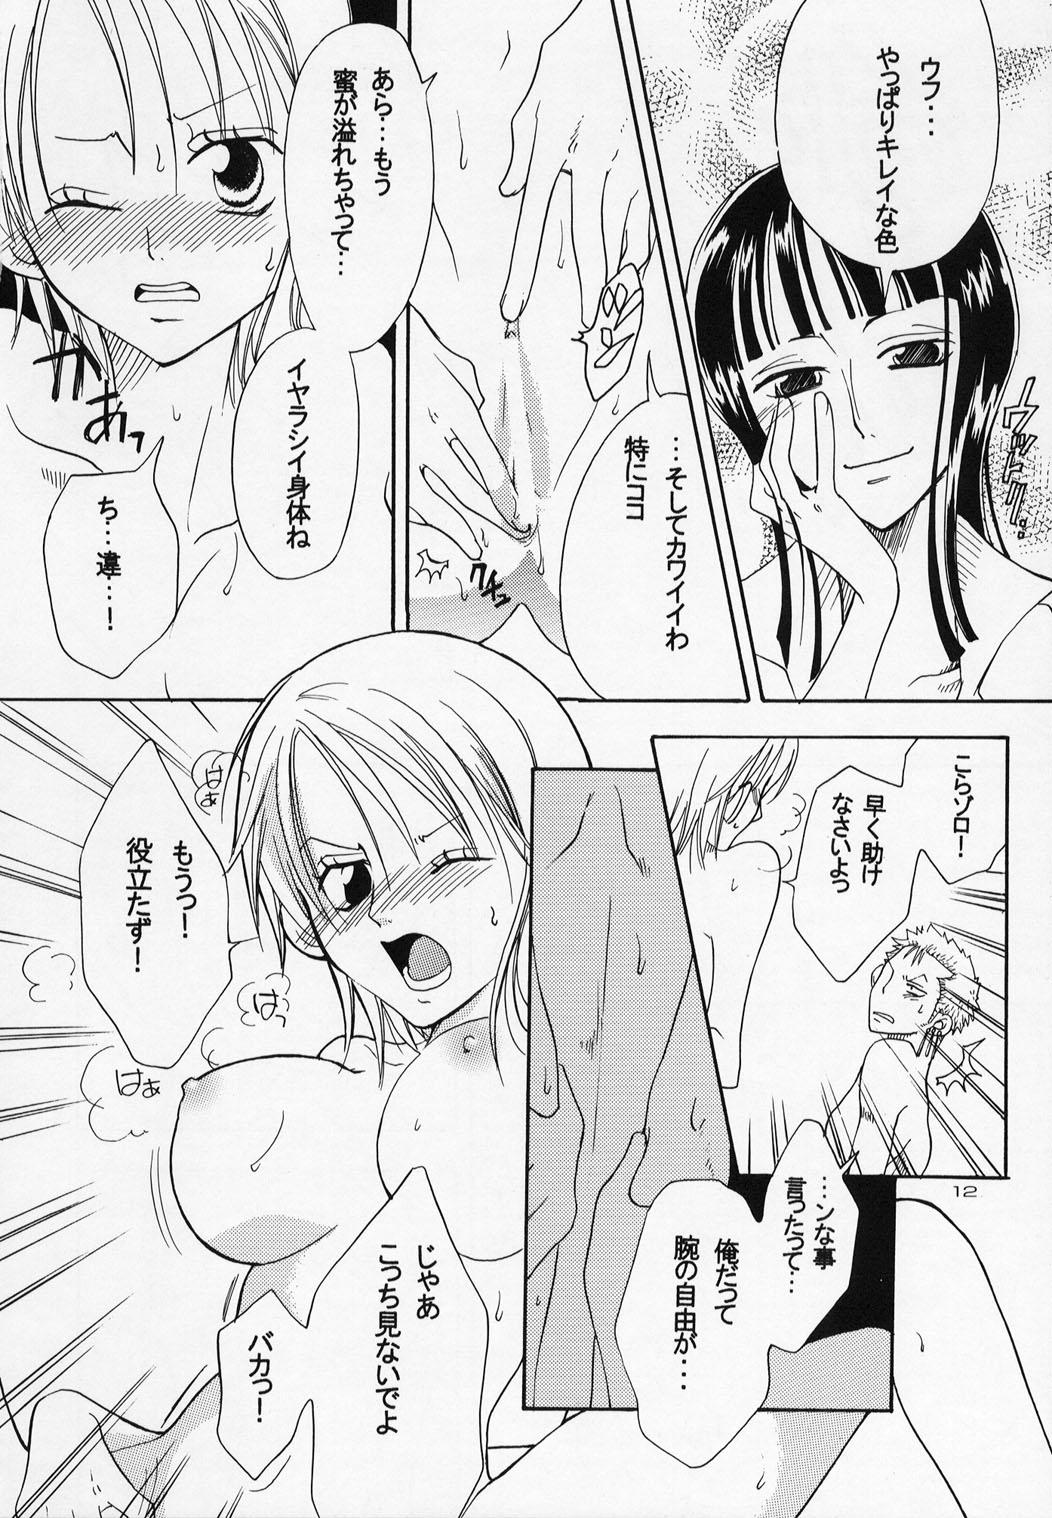 Gay Brokenboys Shiawase Punch! 4 - One piece Spoon - Page 12